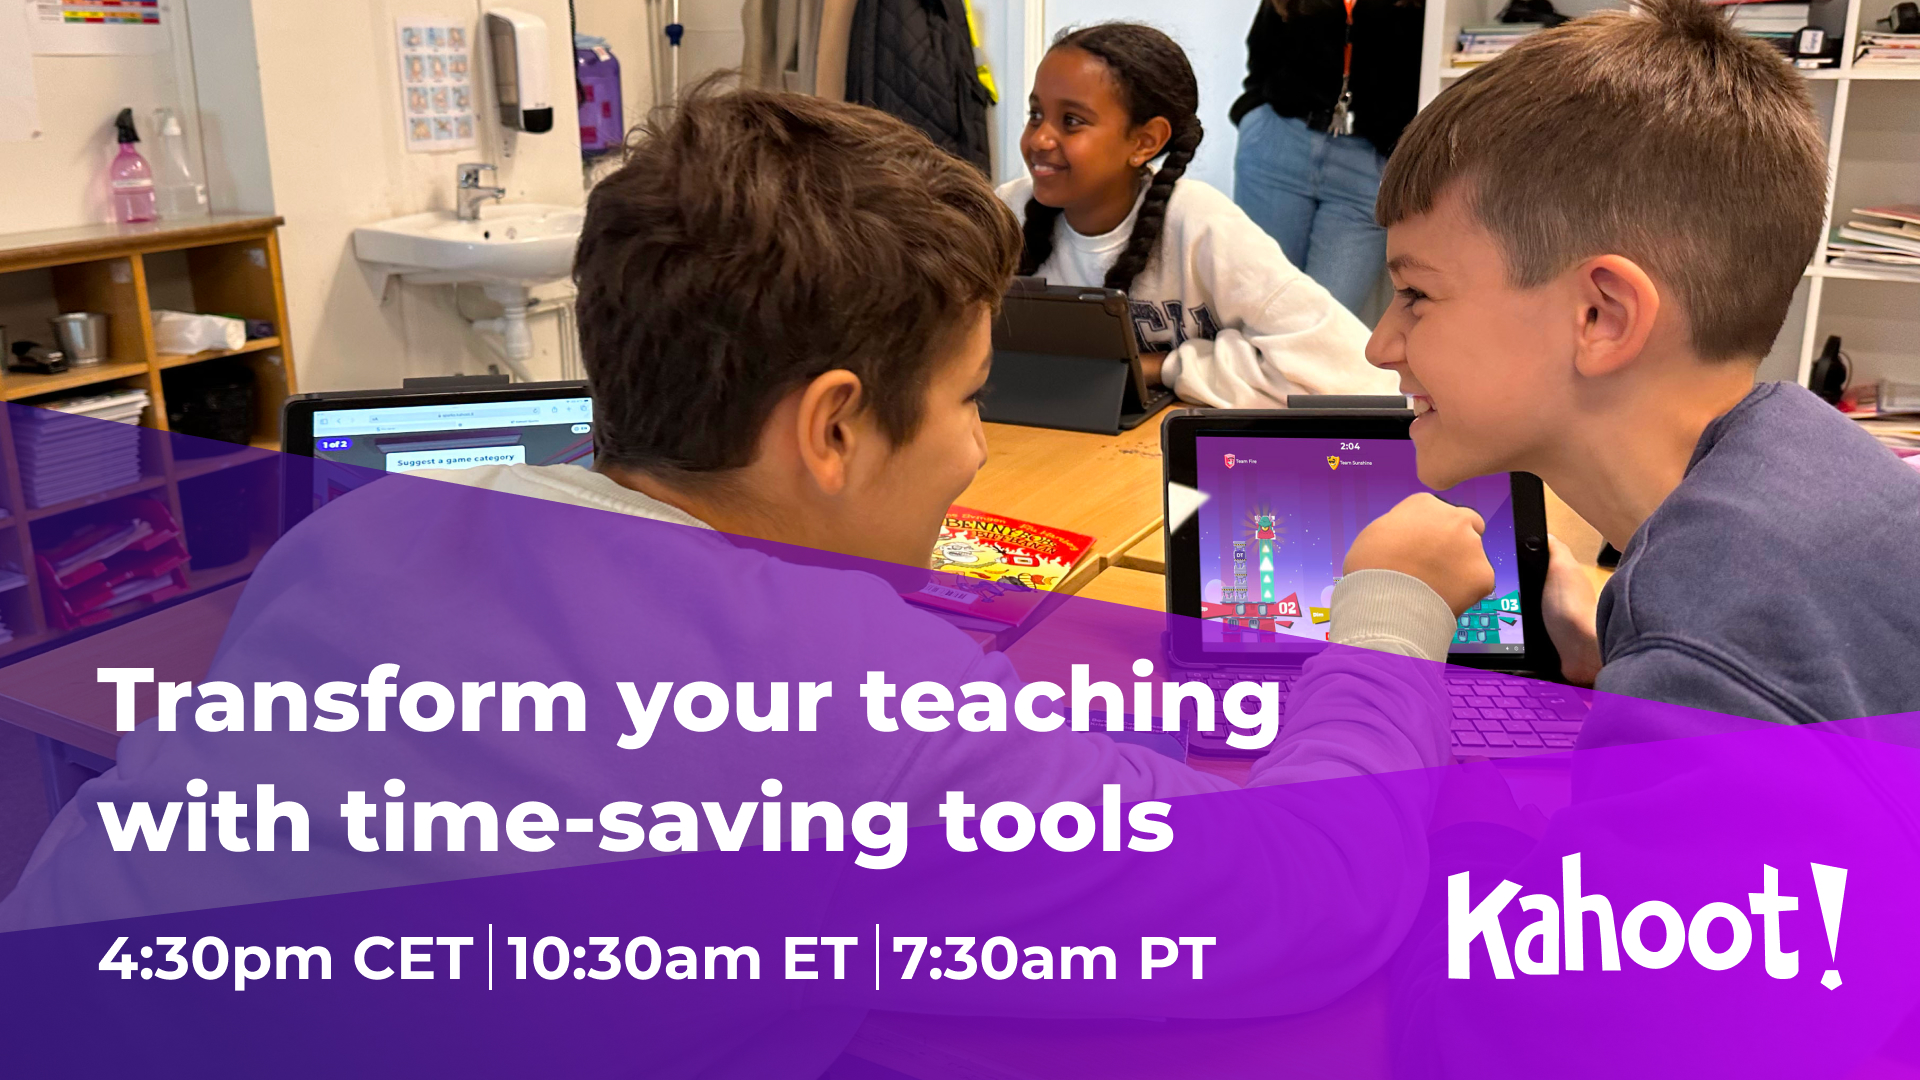 Image of two boys playing Kahoot! while smiling to each other. Text: Free Kahoot! webinar: transform your teaching with time-saving tools